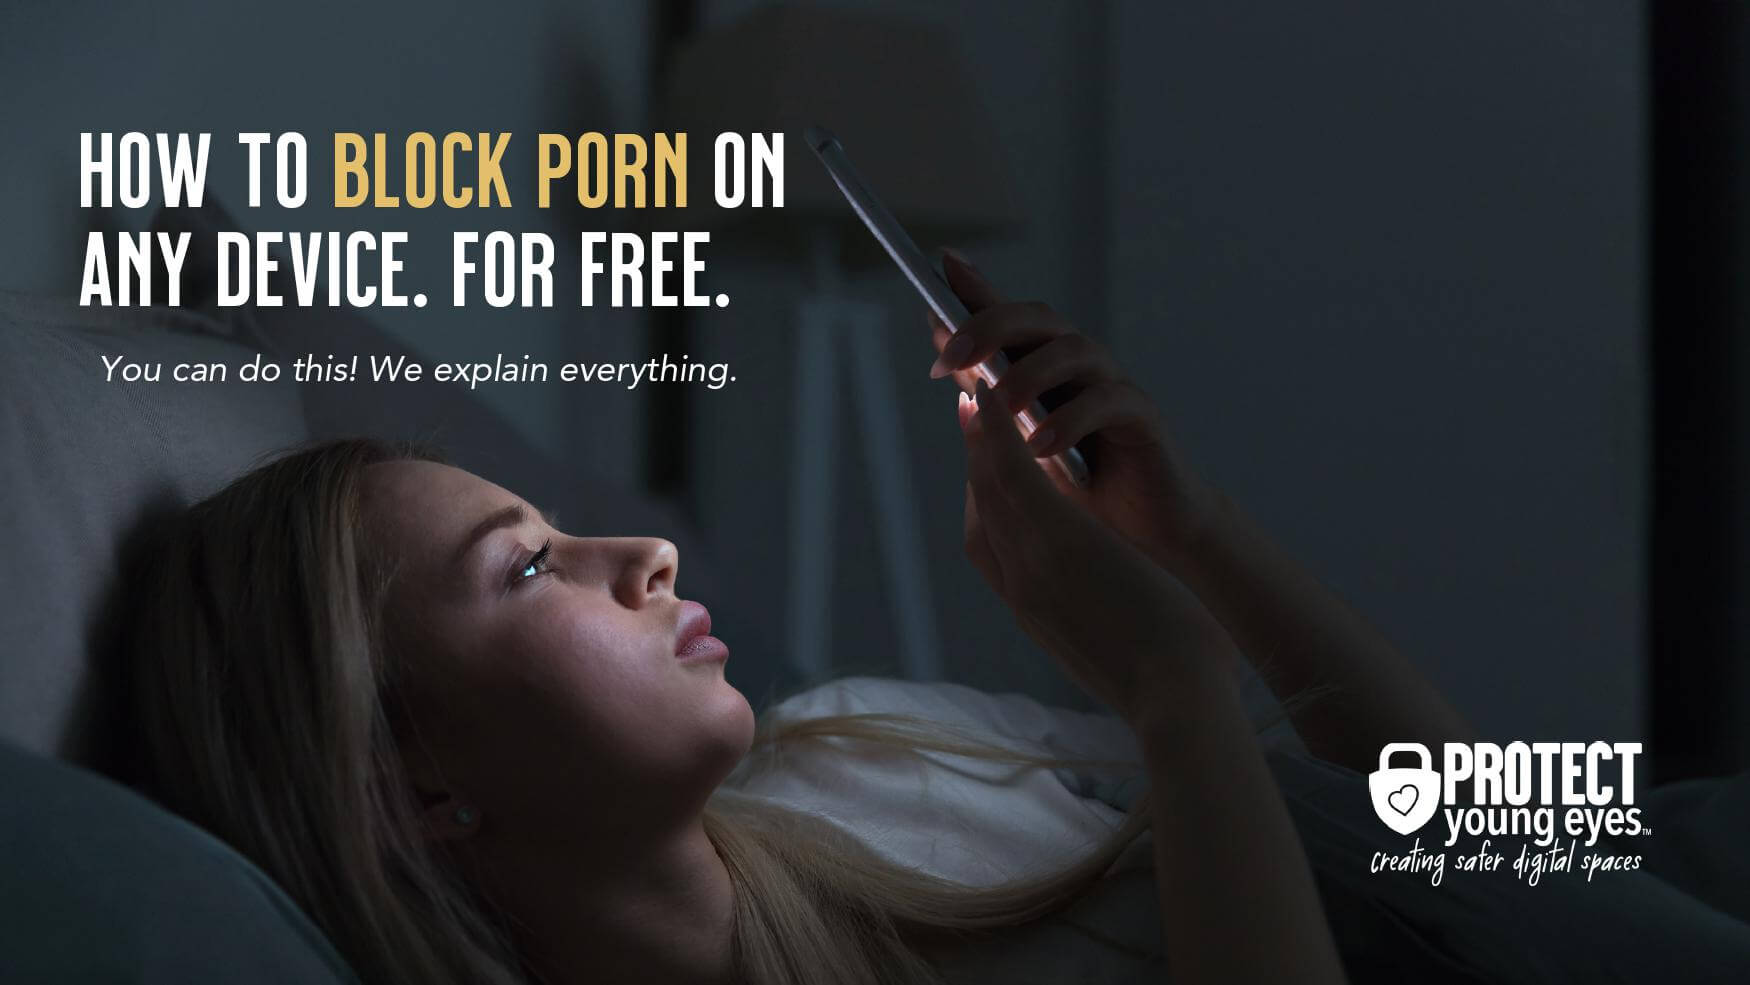 Big Block In Coc In Has - How to Block Porn on Any Device. For Free. - Protect Young Eyes